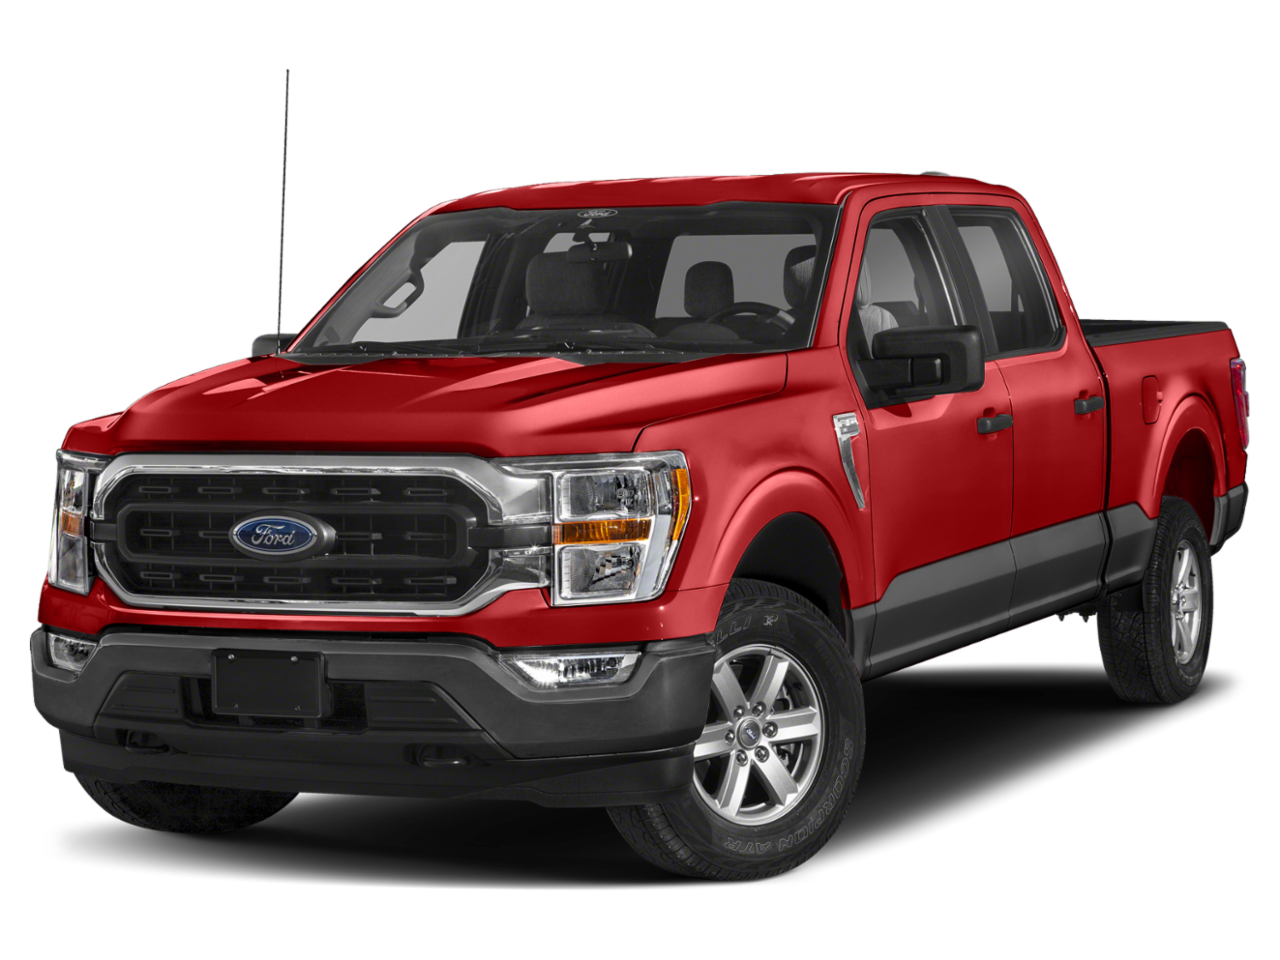 Milbank Ford, Inc. is a Ford dealer selling new and used cars in